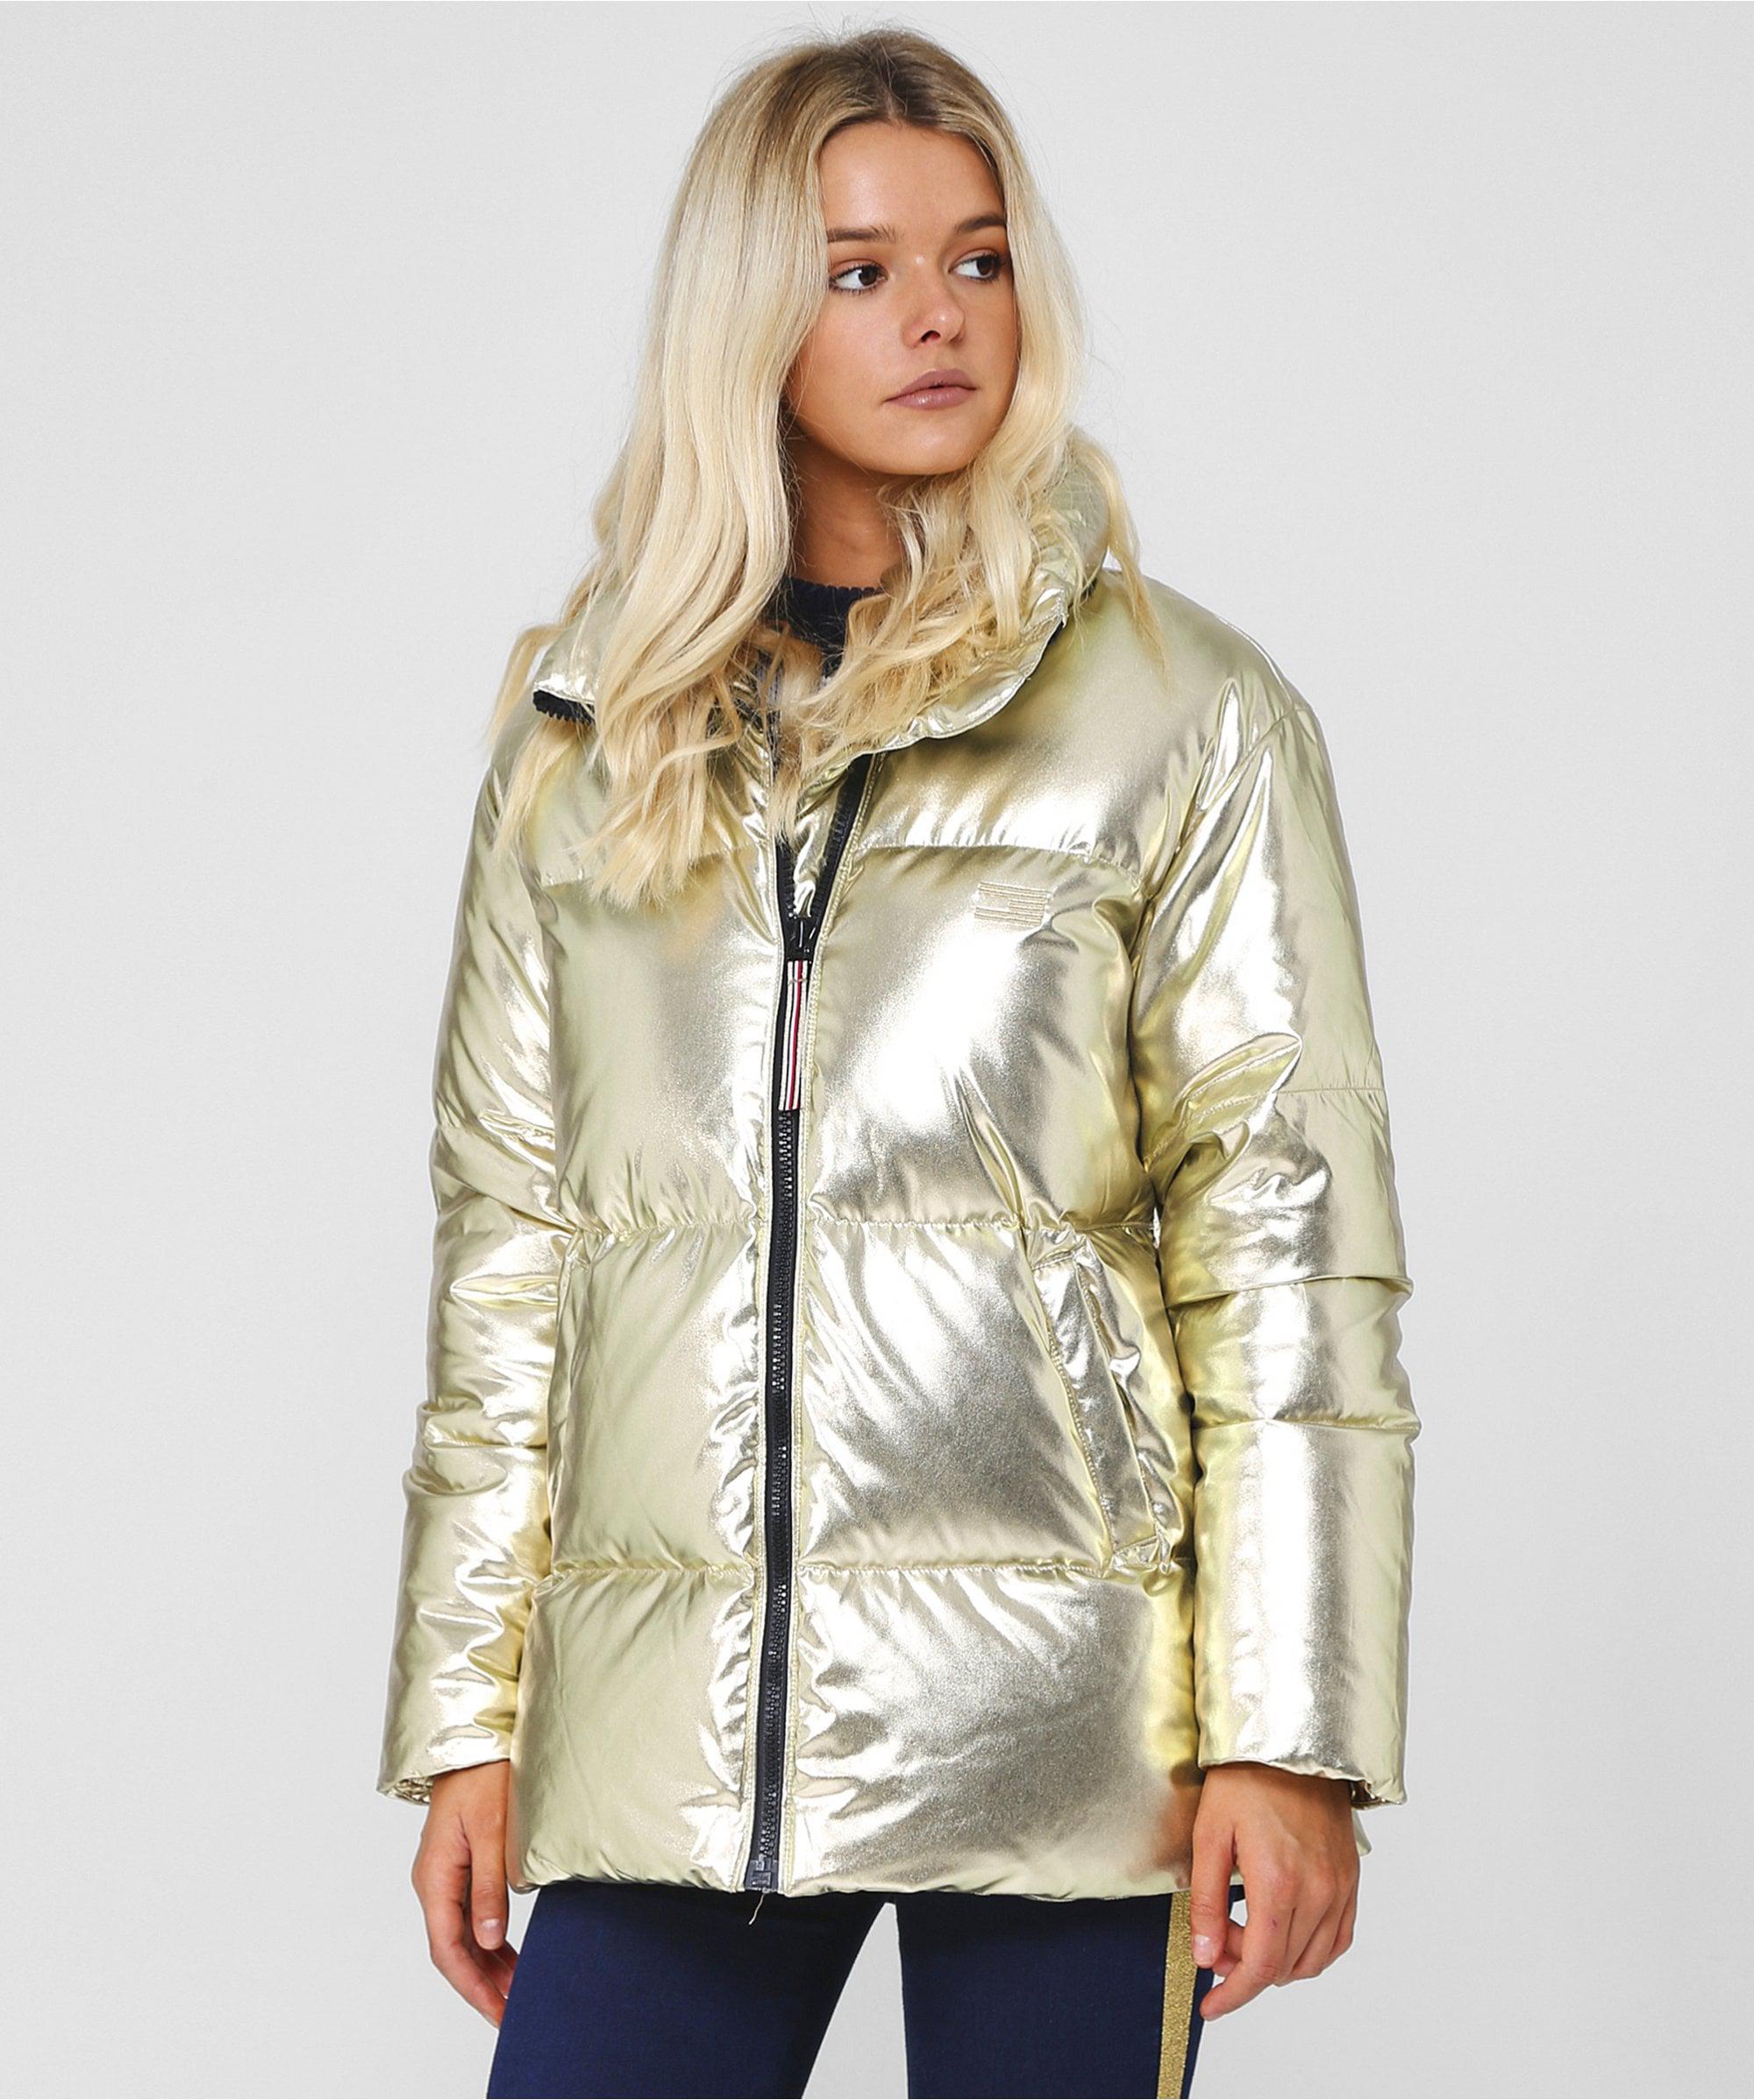 Hilfiger Synthetic Tommy Icons Puffer Jacket in Gold (Metallic) - Lyst